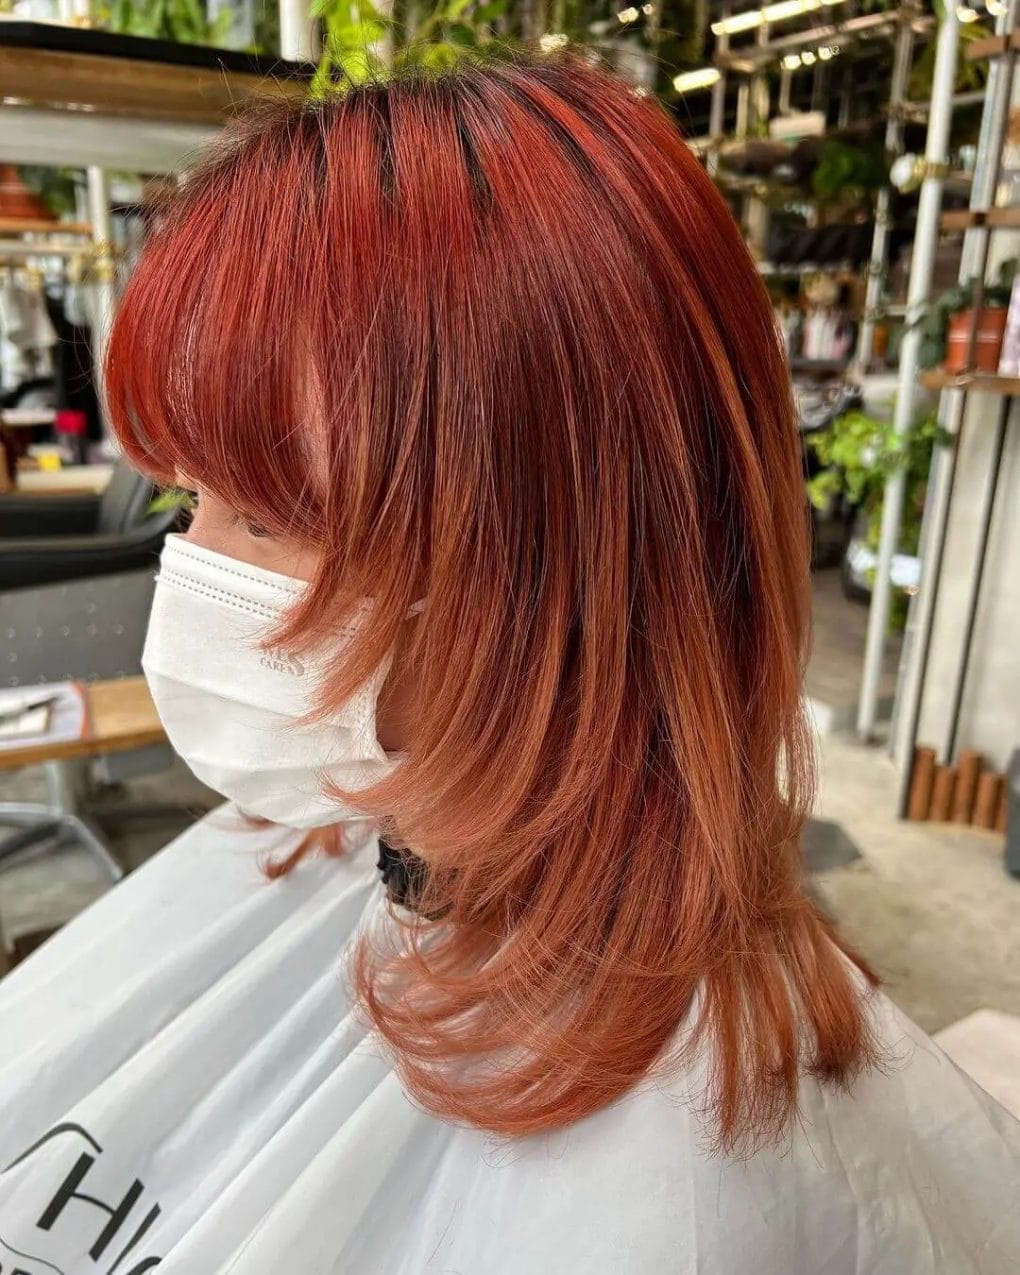 Bold fiery copper wolf cut with red streaks and precision layers.